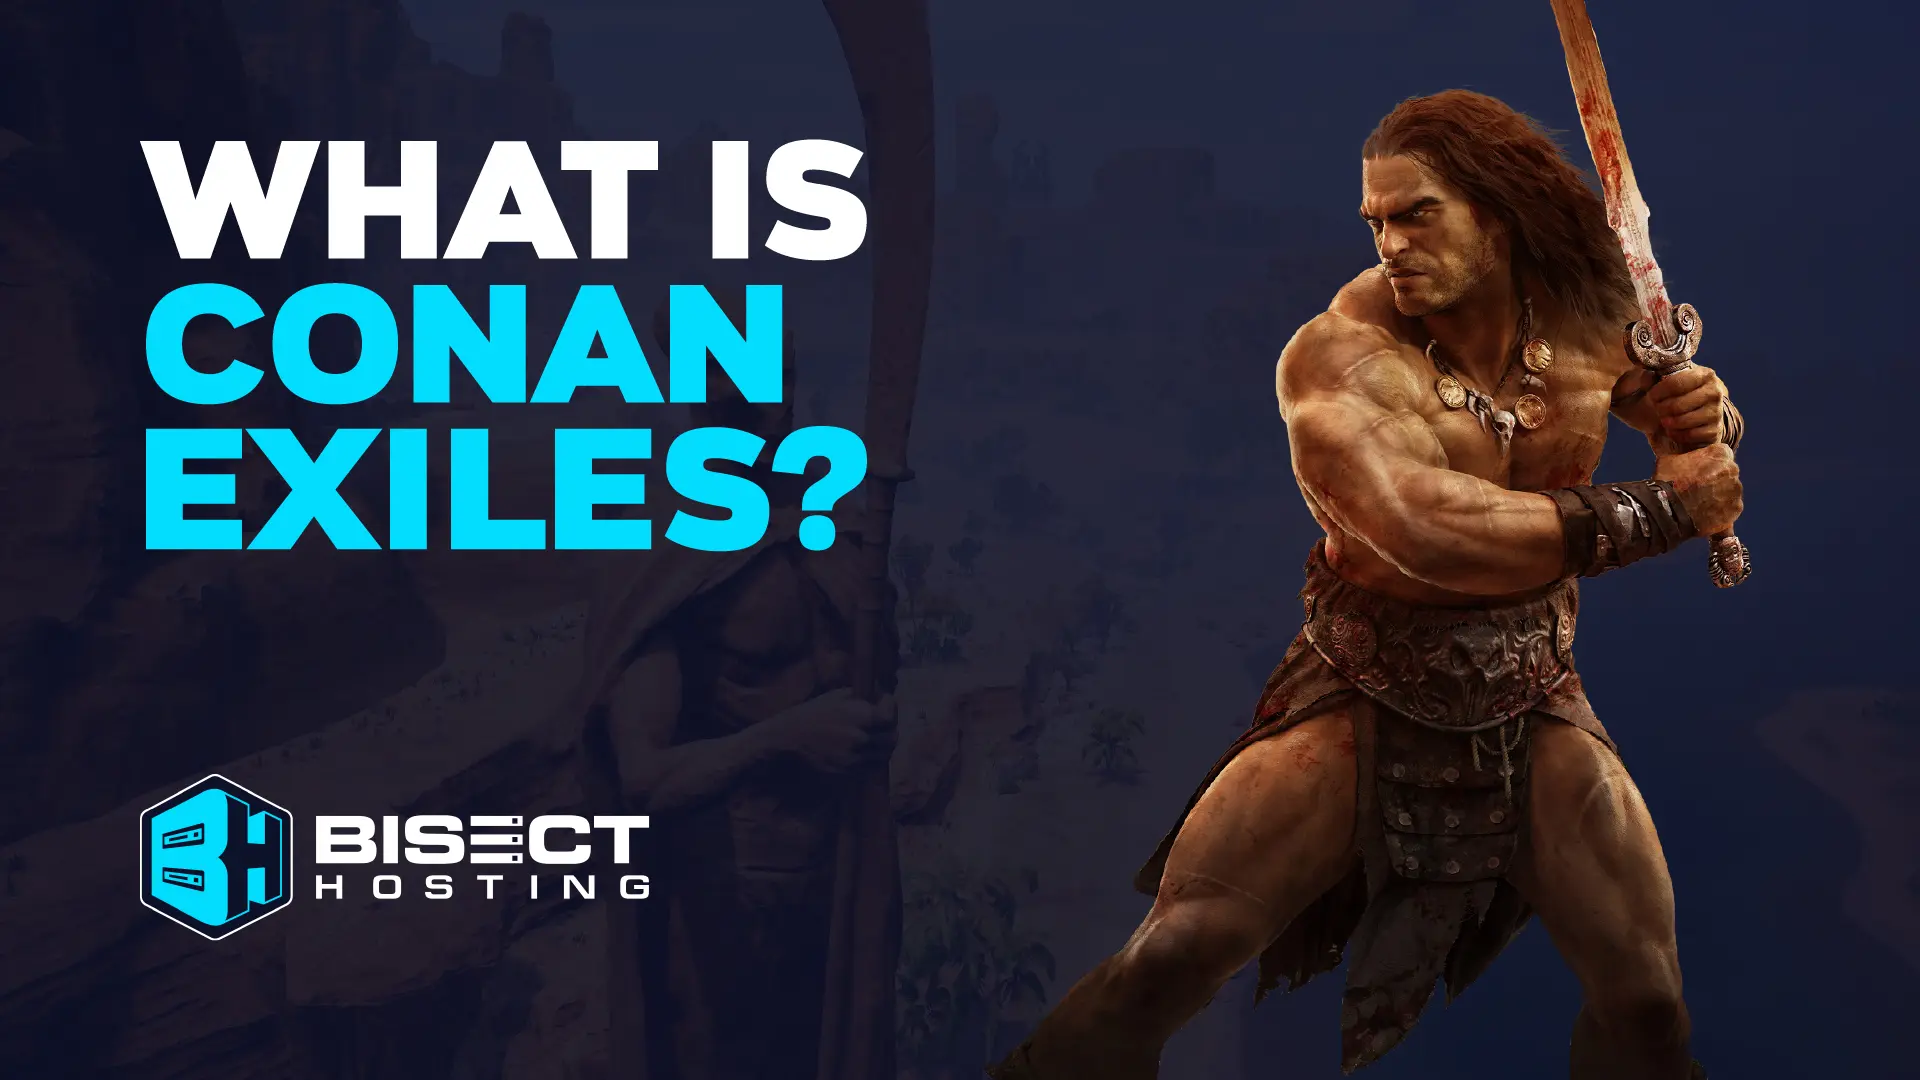 What is Conan Exiles?